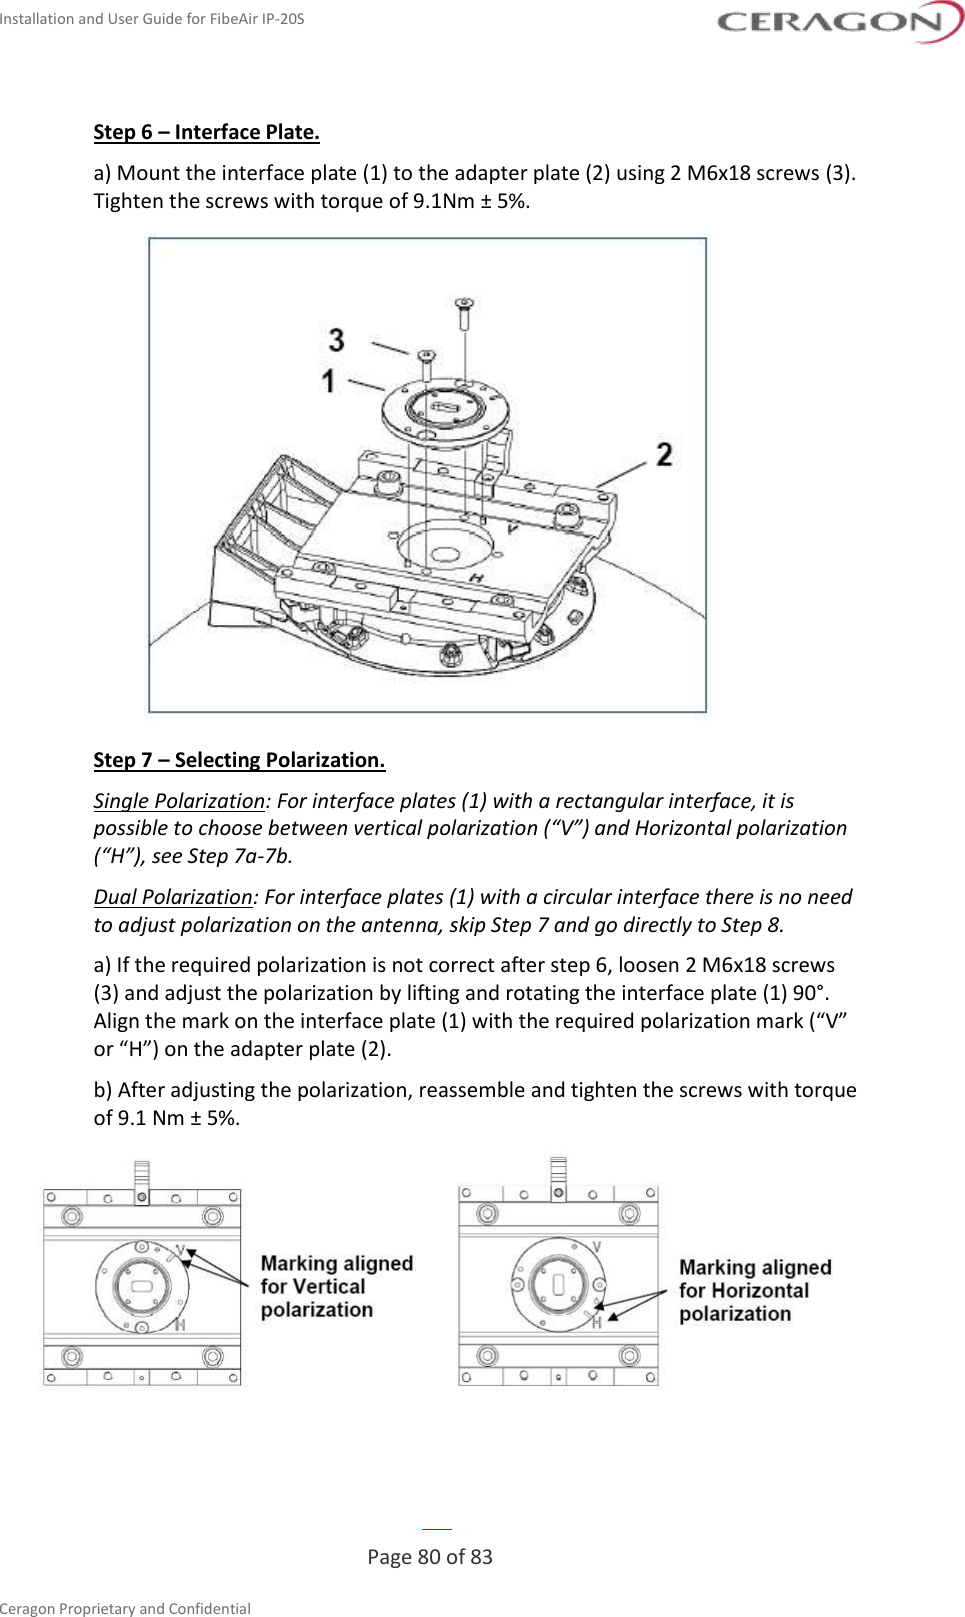 Installation and User Guide for FibeAir IP-20S   Page 80 of 83  Ceragon Proprietary and Confidential     Step 6 – Interface Plate. a) Mount the interface plate (1) to the adapter plate (2) using 2 M6x18 screws (3). Tighten the screws with torque of 9.1Nm ± 5%.  Step 7 – Selecting Polarization. Single Polarization: For interface plates (1) with a rectangular interface, it is possible to choose between vertical polarization (“V”) and Horizontal polarization (“H”), see Step 7a-7b. Dual Polarization: For interface plates (1) with a circular interface there is no need to adjust polarization on the antenna, skip Step 7 and go directly to Step 8. a) If the required polarization is not correct after step 6, loosen 2 M6x18 screws (3) and adjust the polarization by lifting and rotating the interface plate (1) 90°. Align the mark on the interface plate (1) with the required polarization mark (“V” or “H”) on the adapter plate (2). b) After adjusting the polarization, reassemble and tighten the screws with torque of 9.1 Nm ± 5%.  